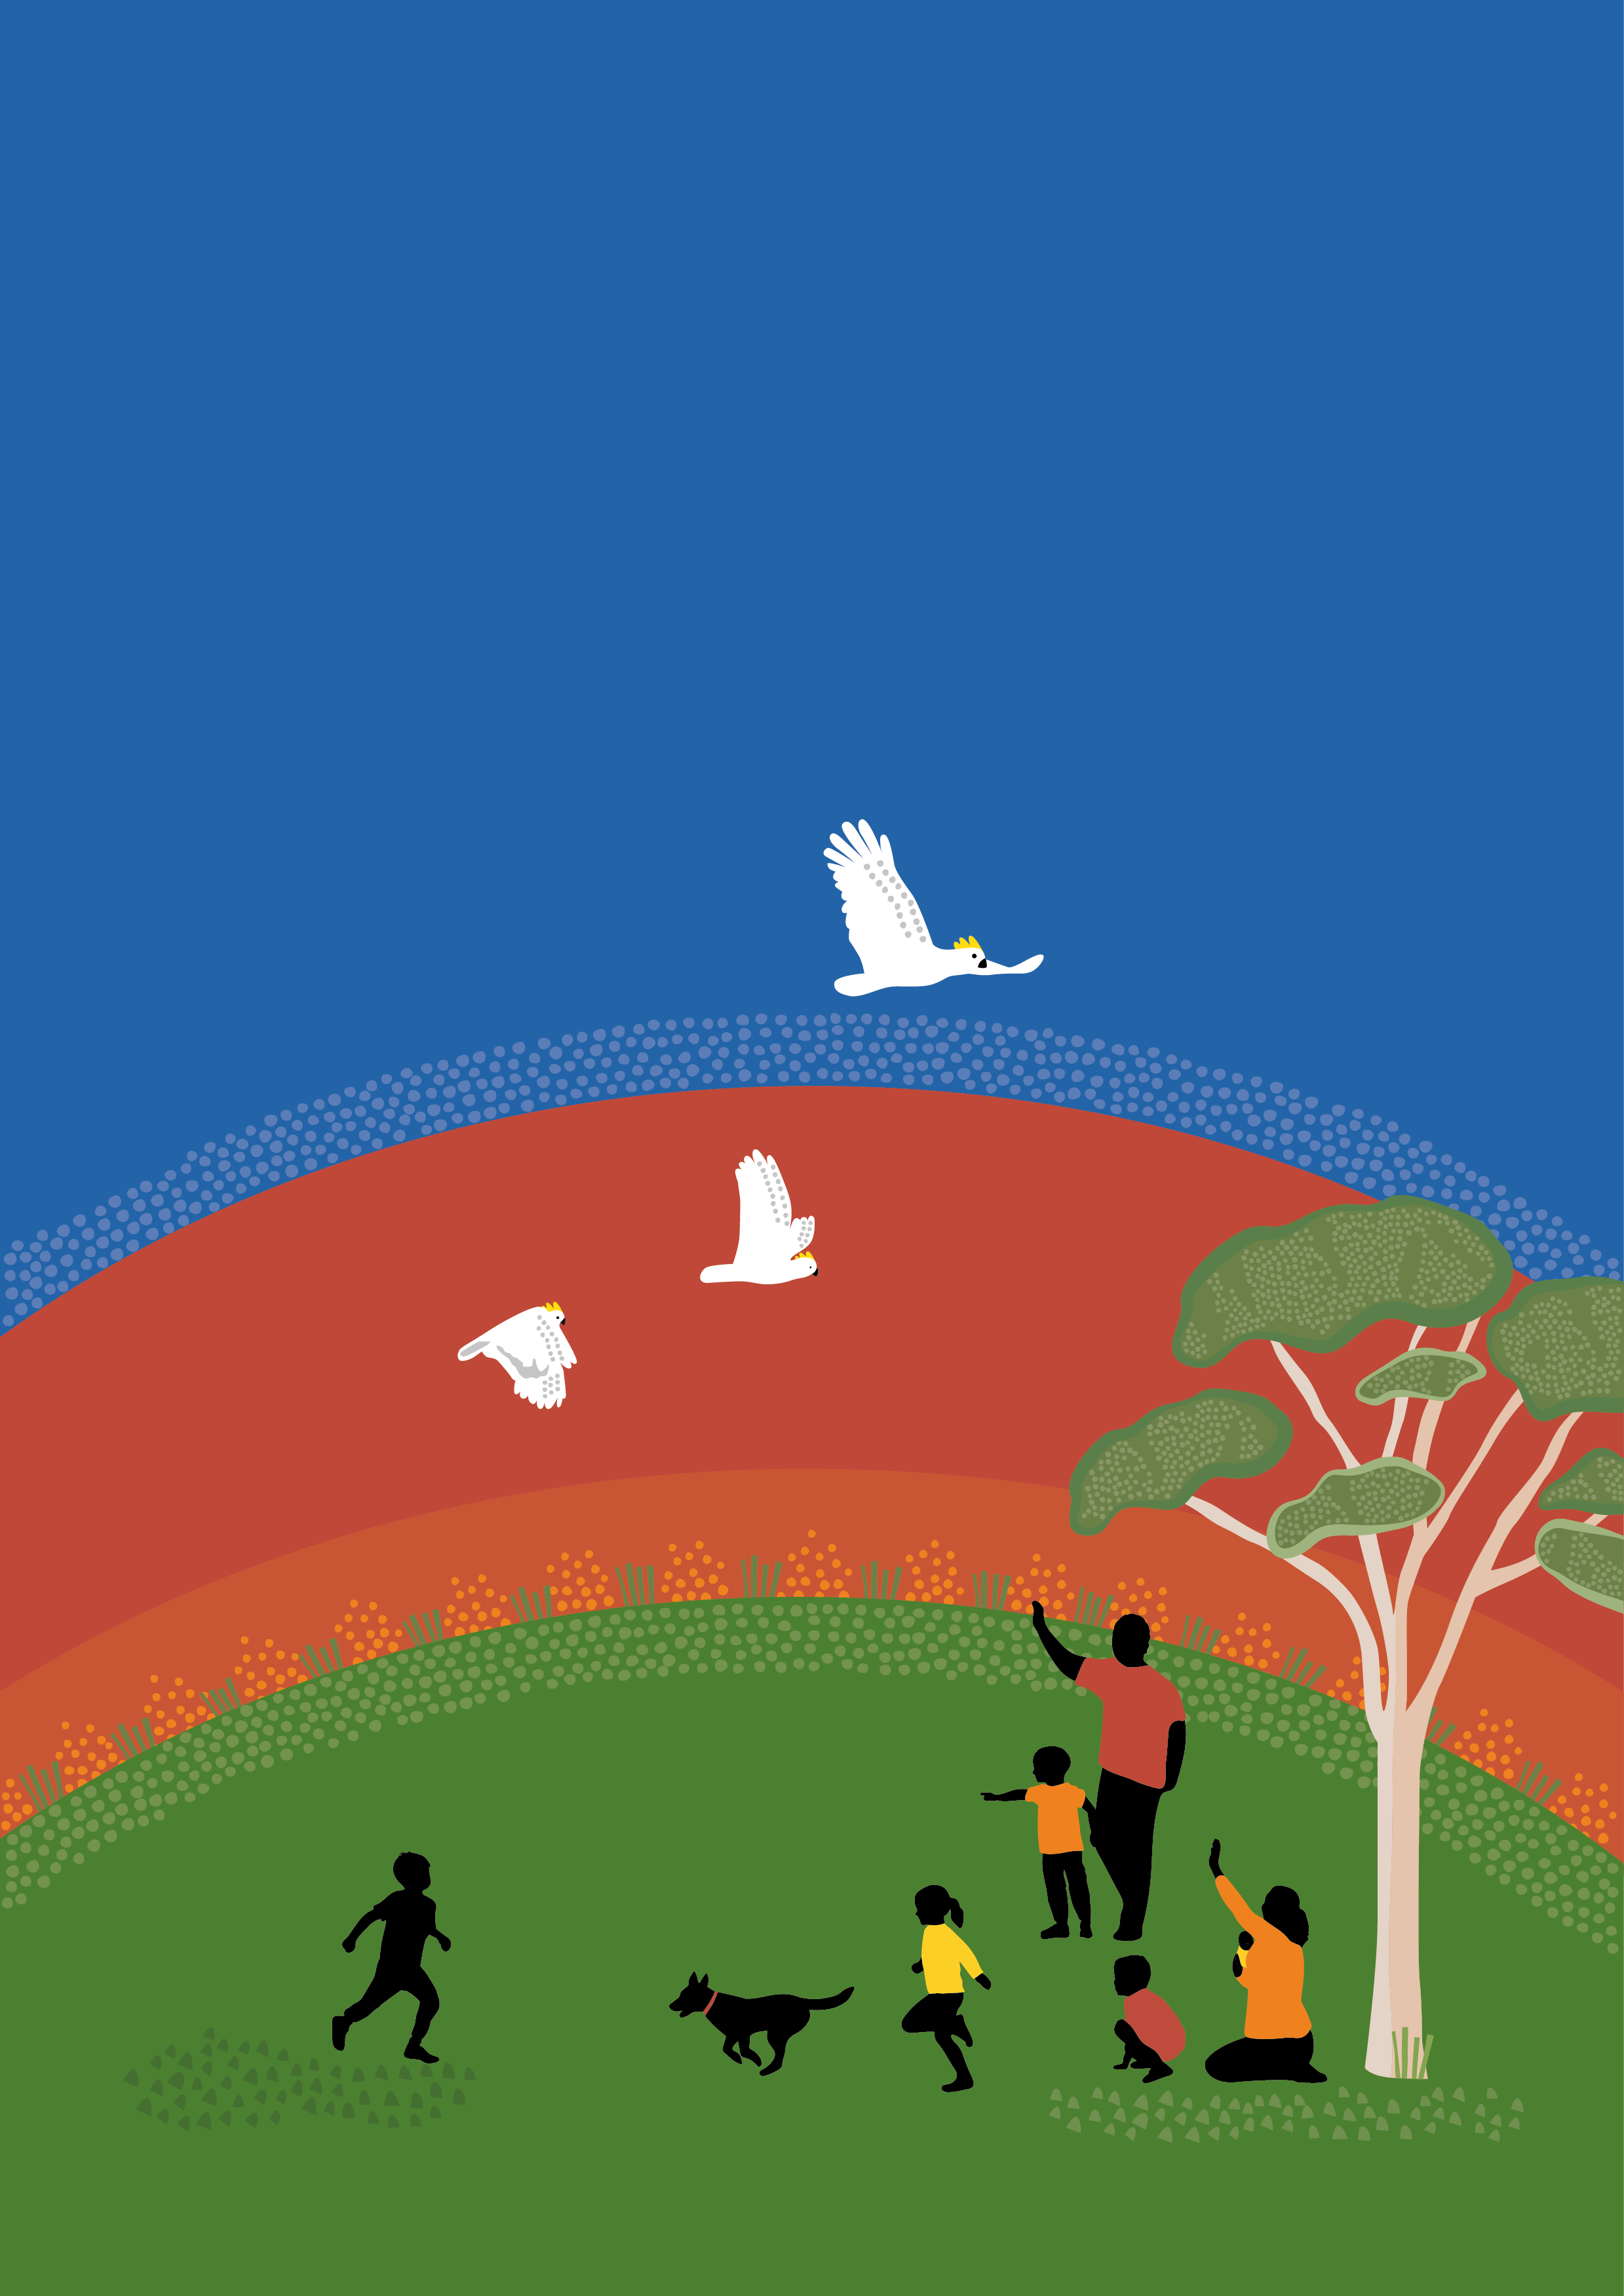 An artwork showing a child running towards his family as they are gathered under a gum tree. They raise their arms towards him. The sky is orange, red and blue. Three cockatoos fly in the sky.